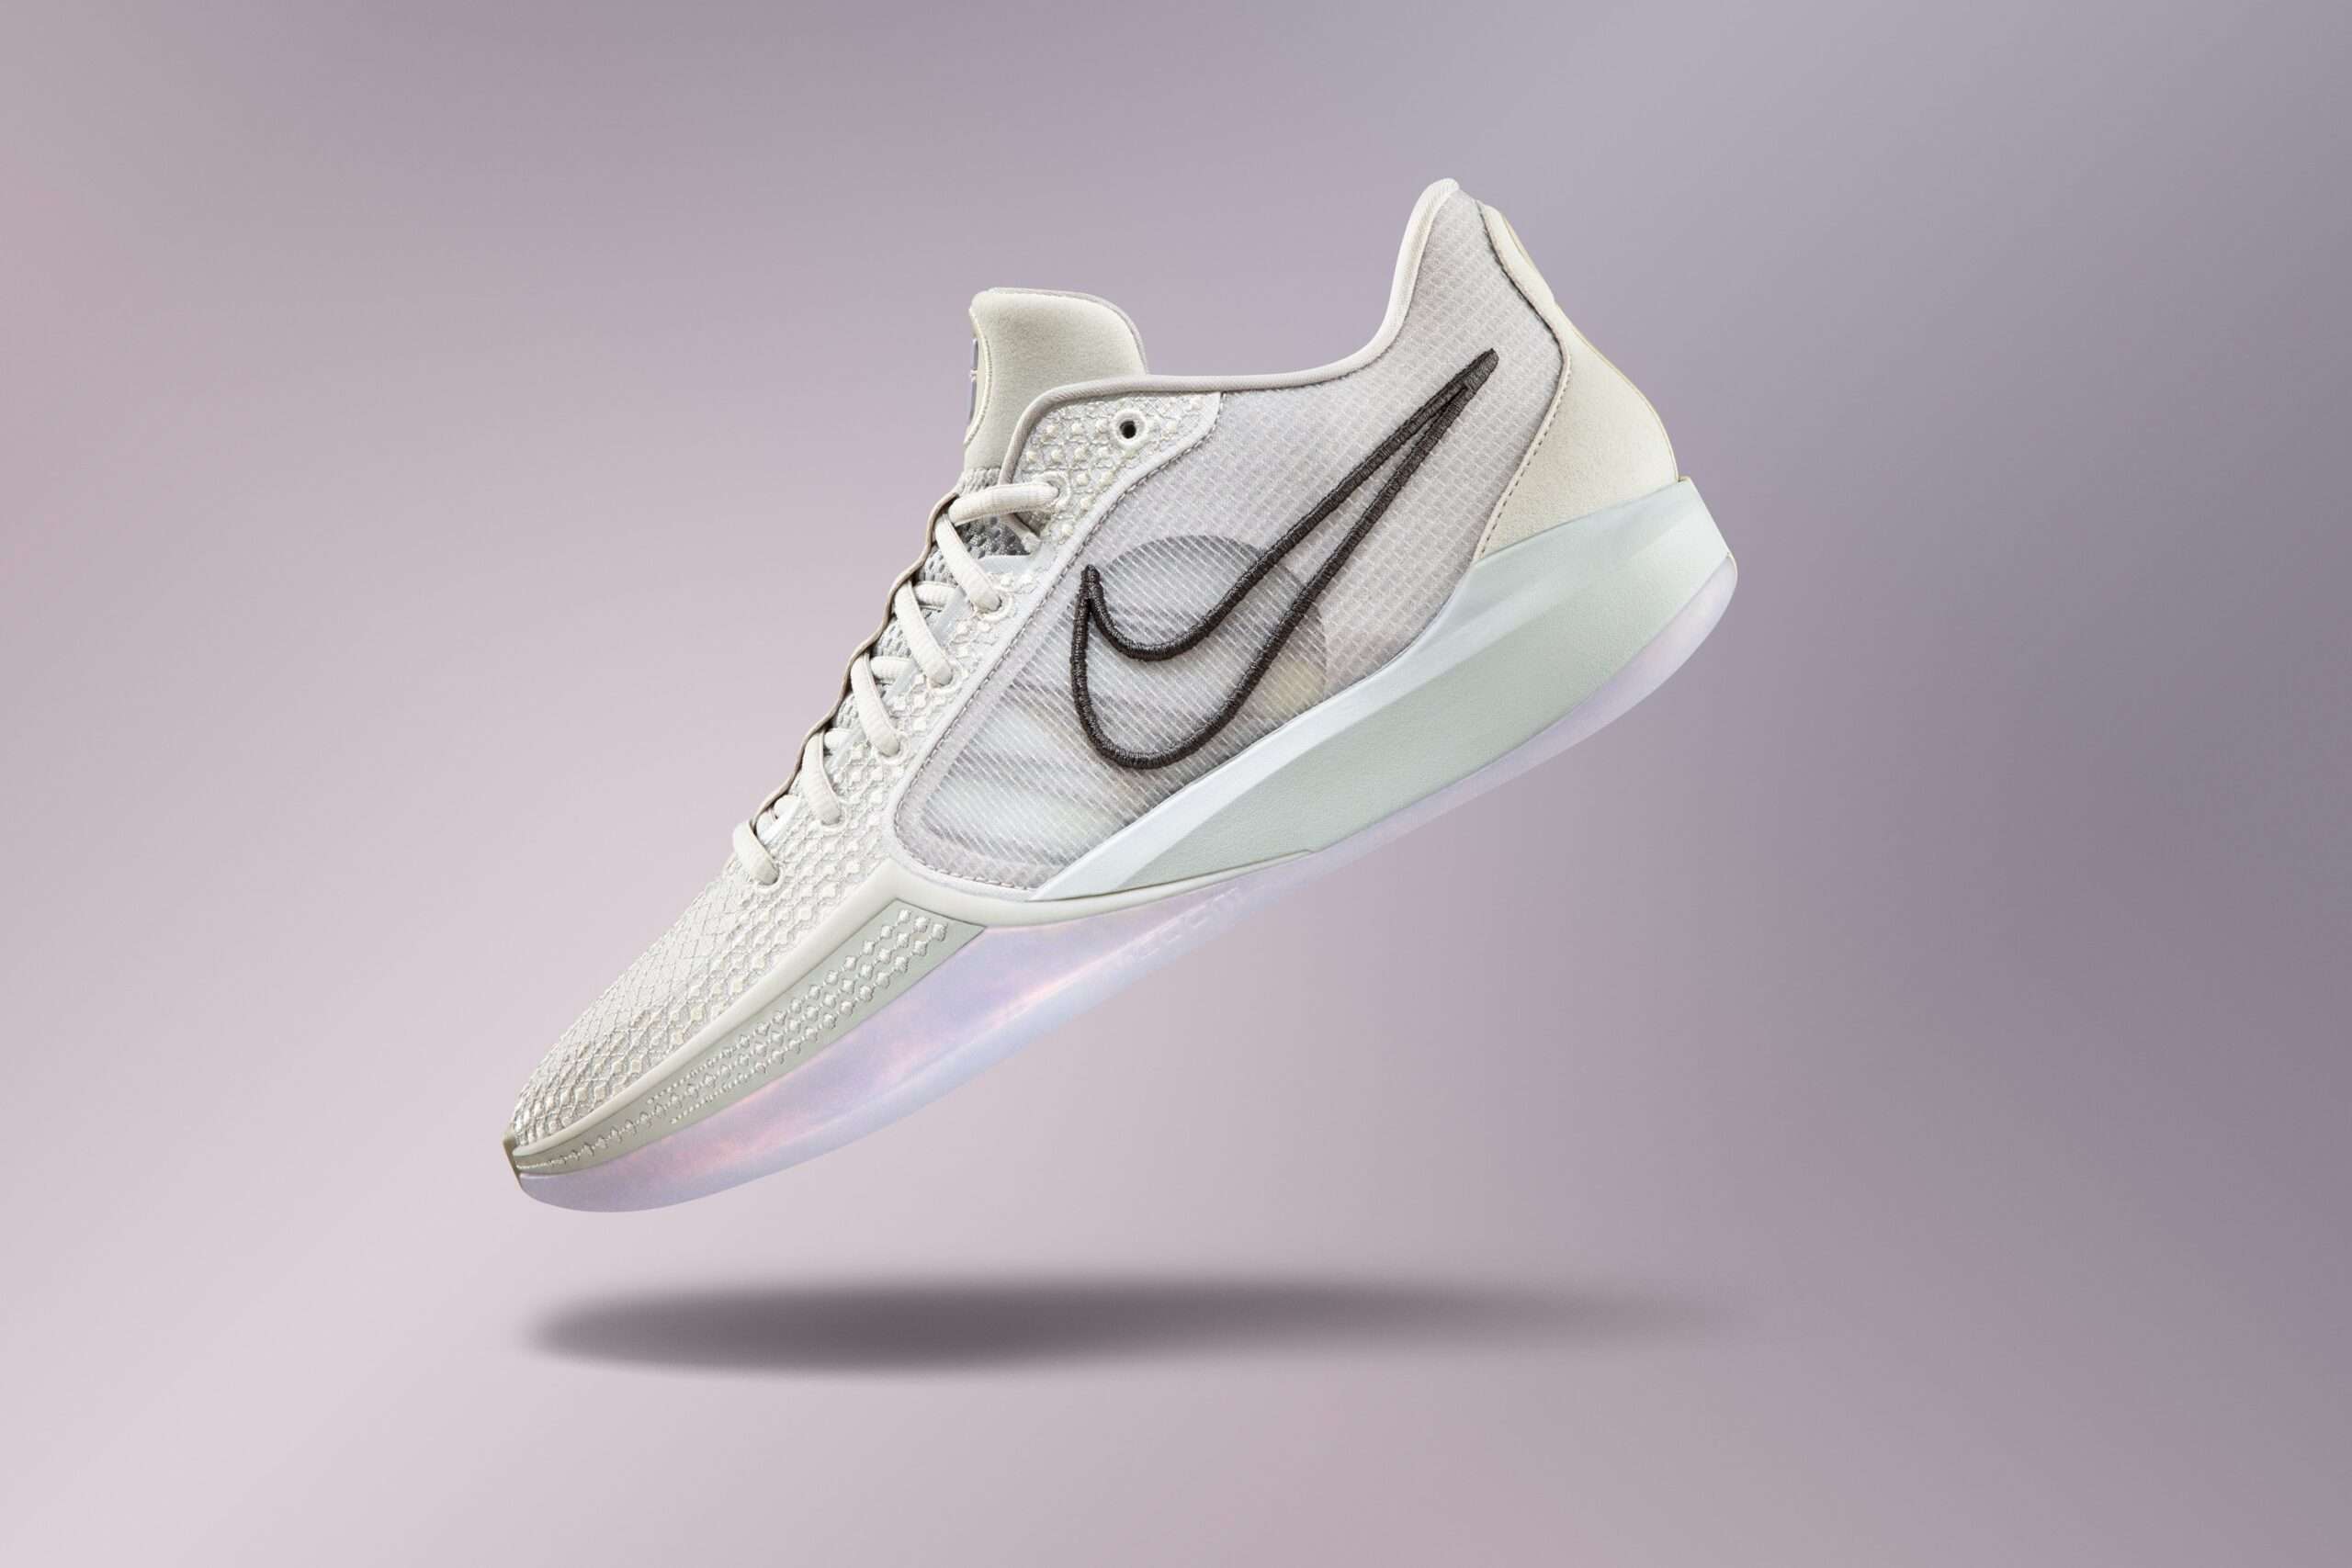 Put On For Your City in These Nike Signature Sneakers